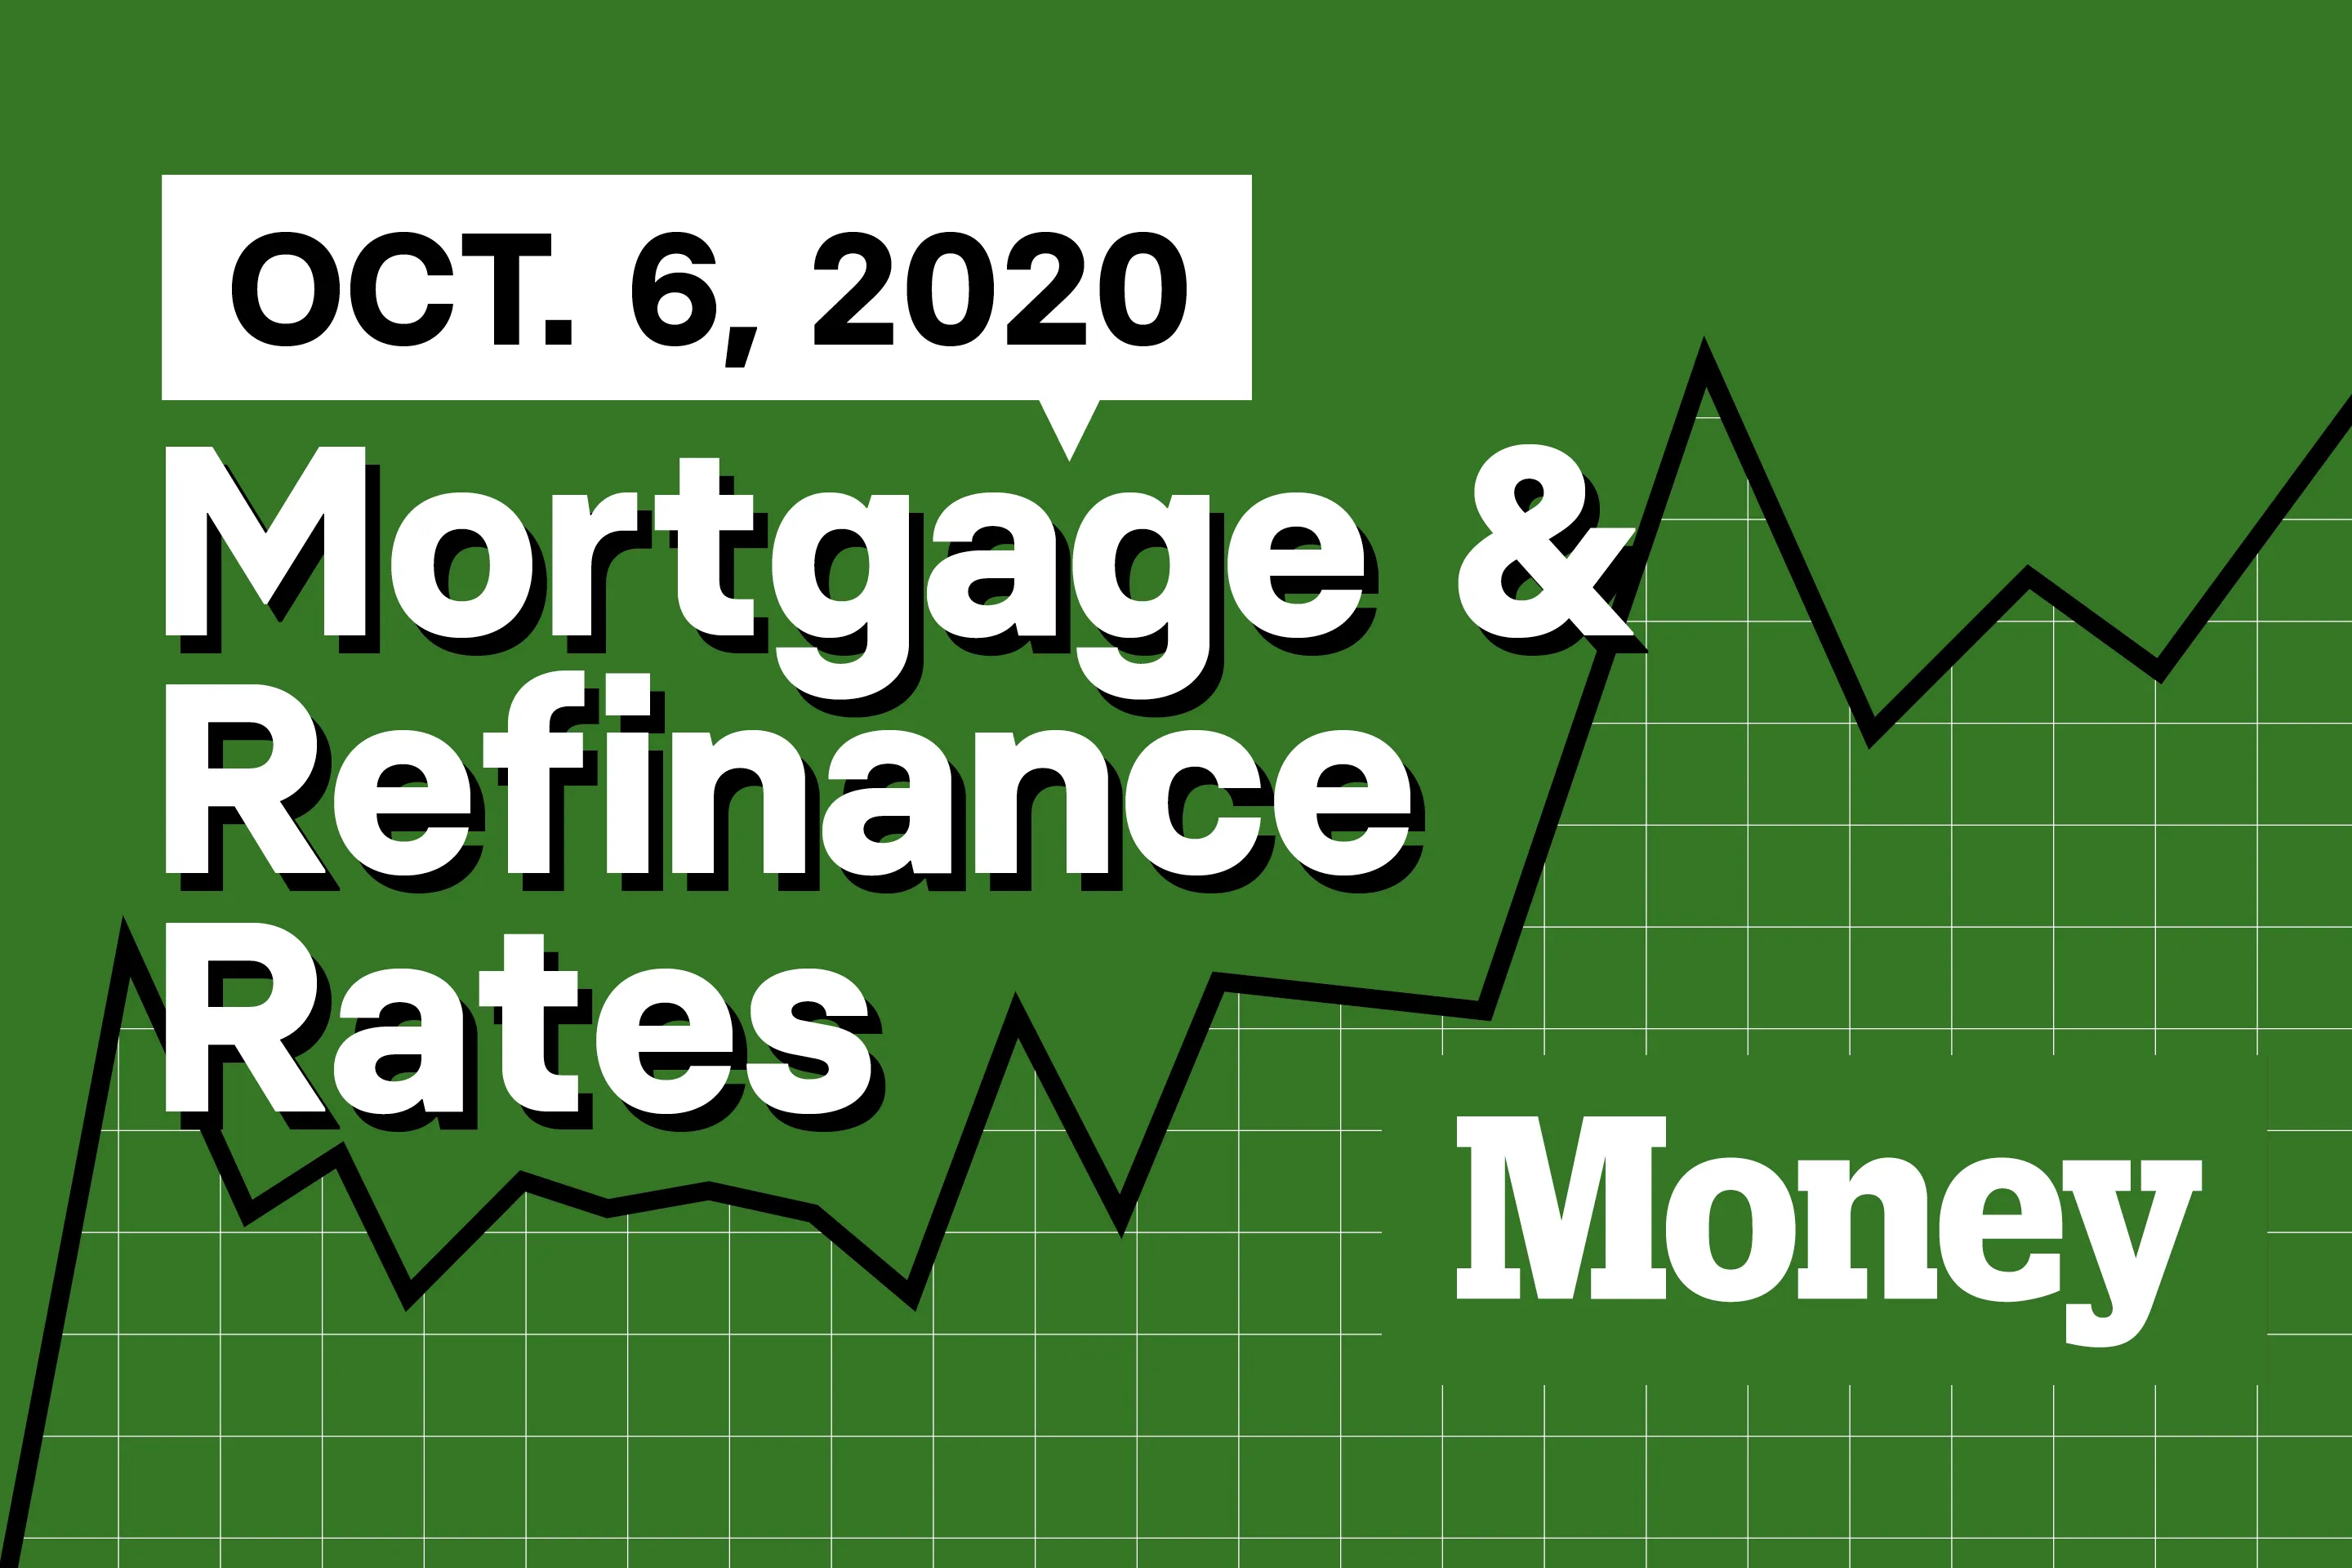 Here Are Today's Best Mortgage & Refinance Rates for October 6, 2020